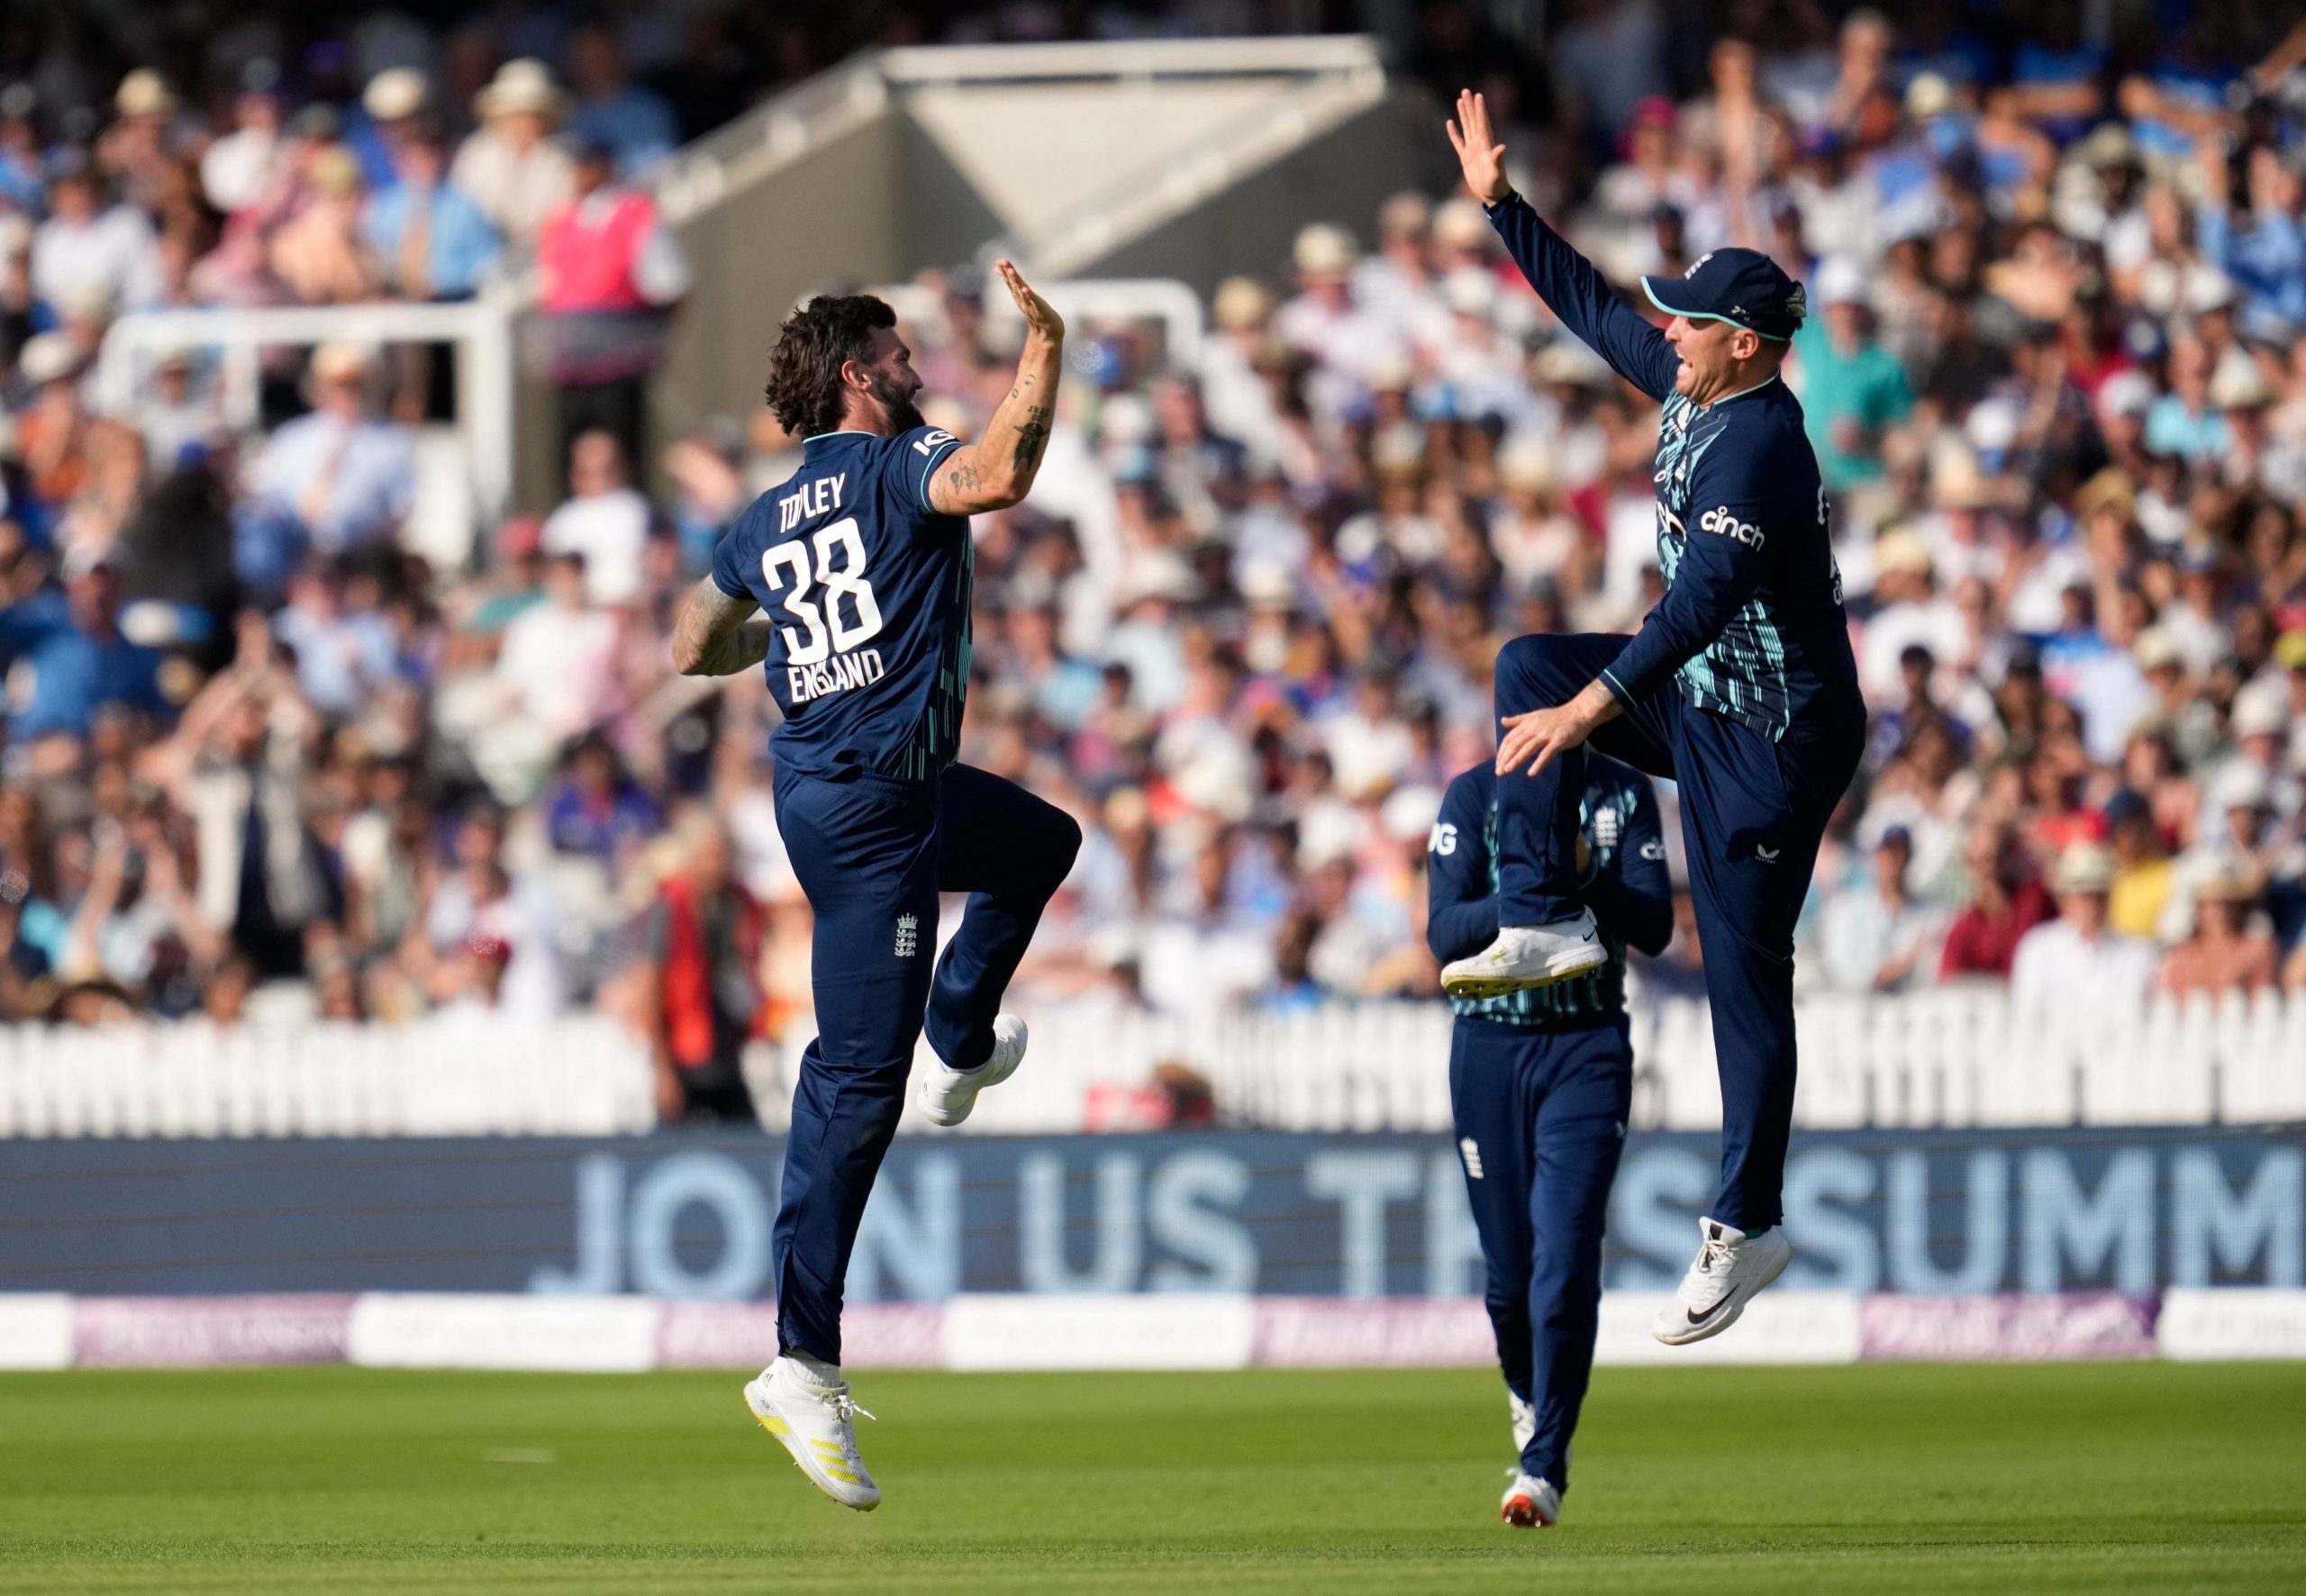 Reece Topley help England steamroll India at Lord’s, level ODI series